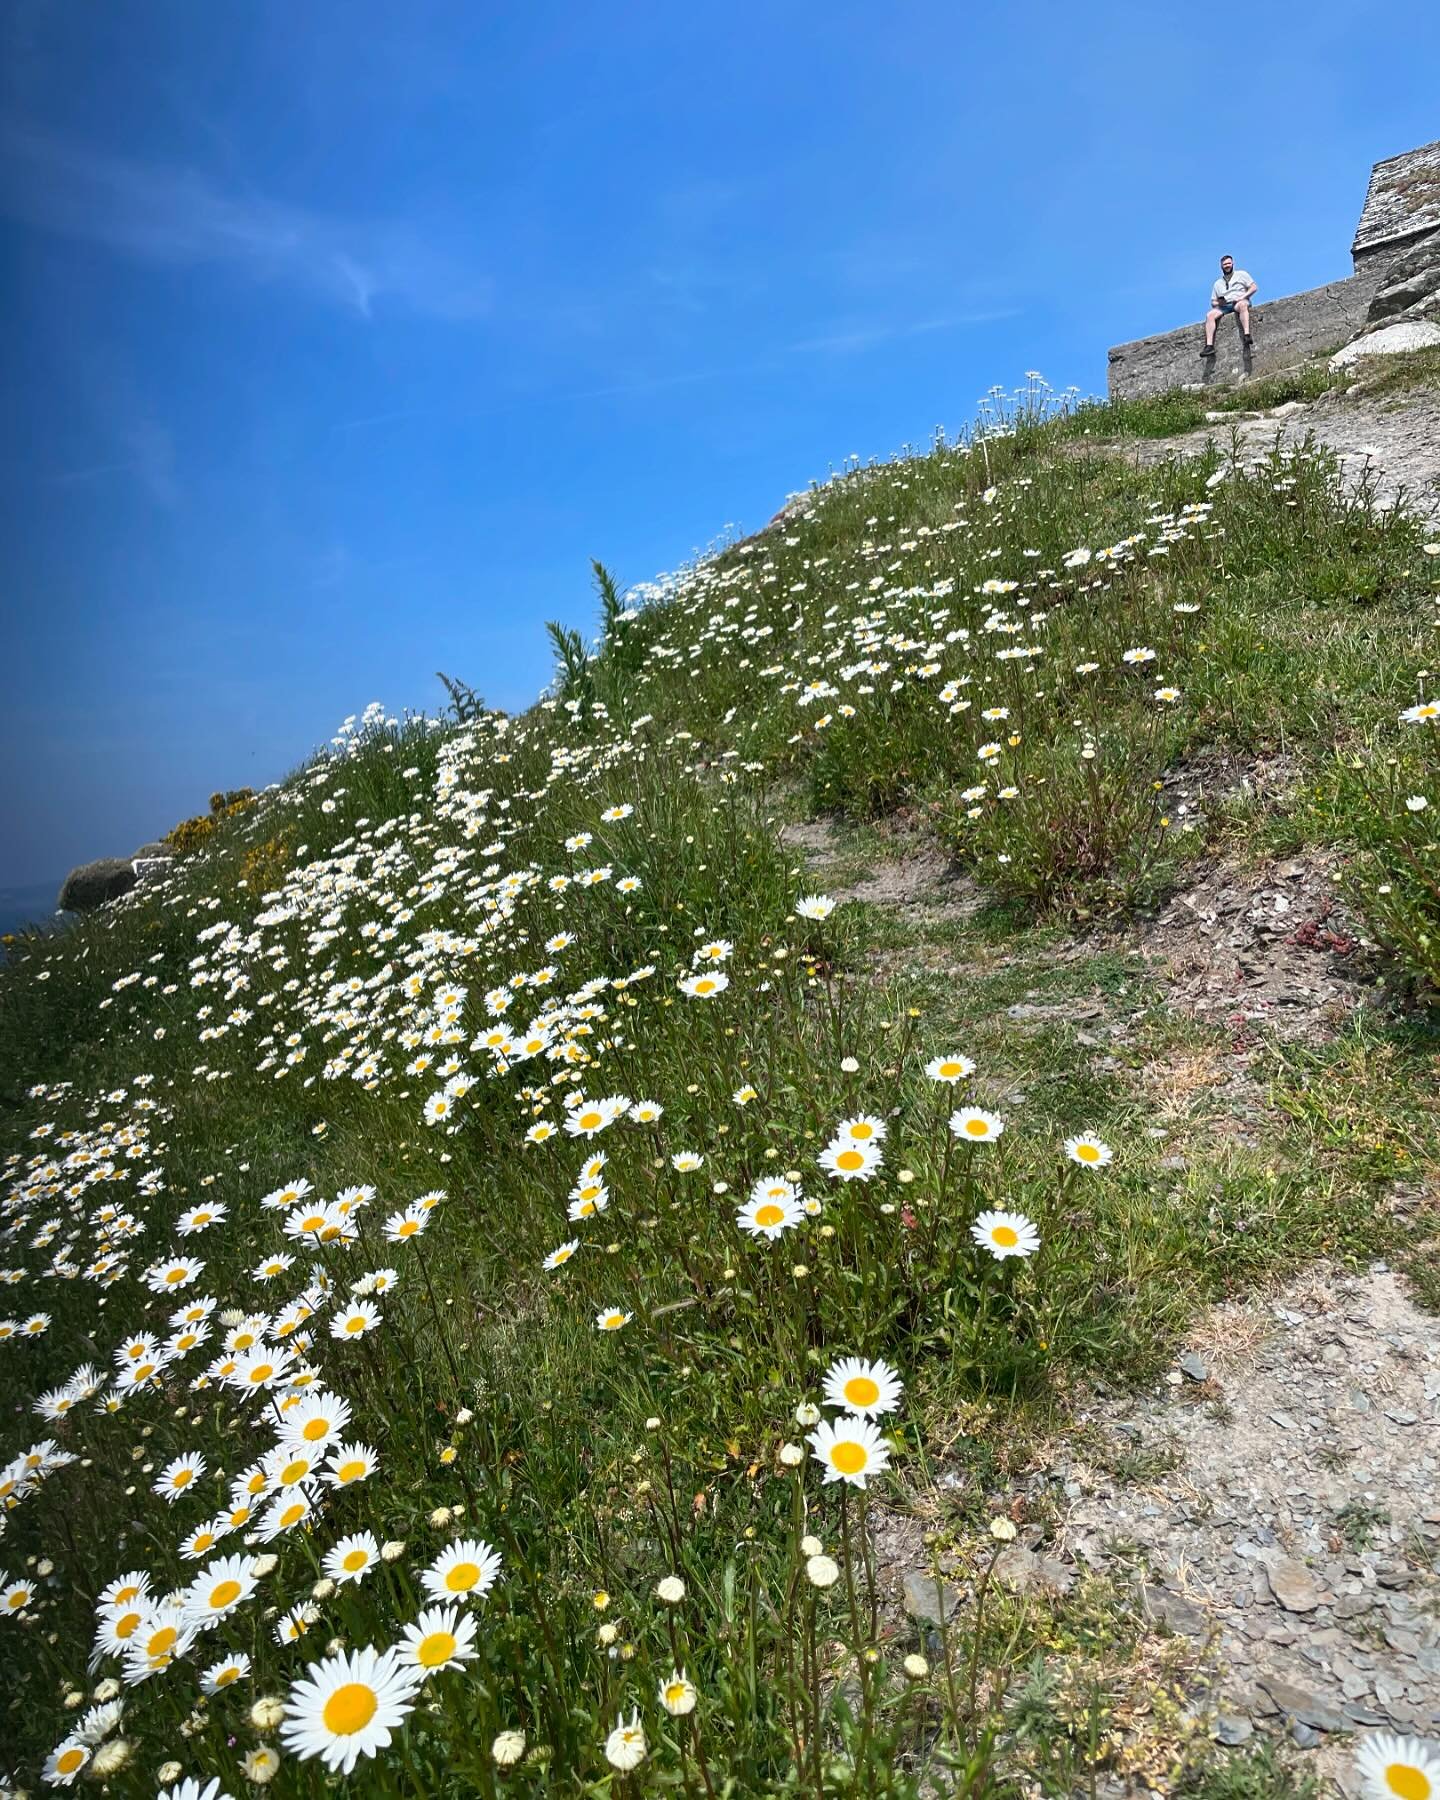 Today was much needed. Something happens to me on a Cornish cliff walk, my shoulders drop and my mind quietens, and I feel so happy! Rame Head is beautiful with an old chapel perched high on a cliff. The gorse was in full bloom and the air was full o